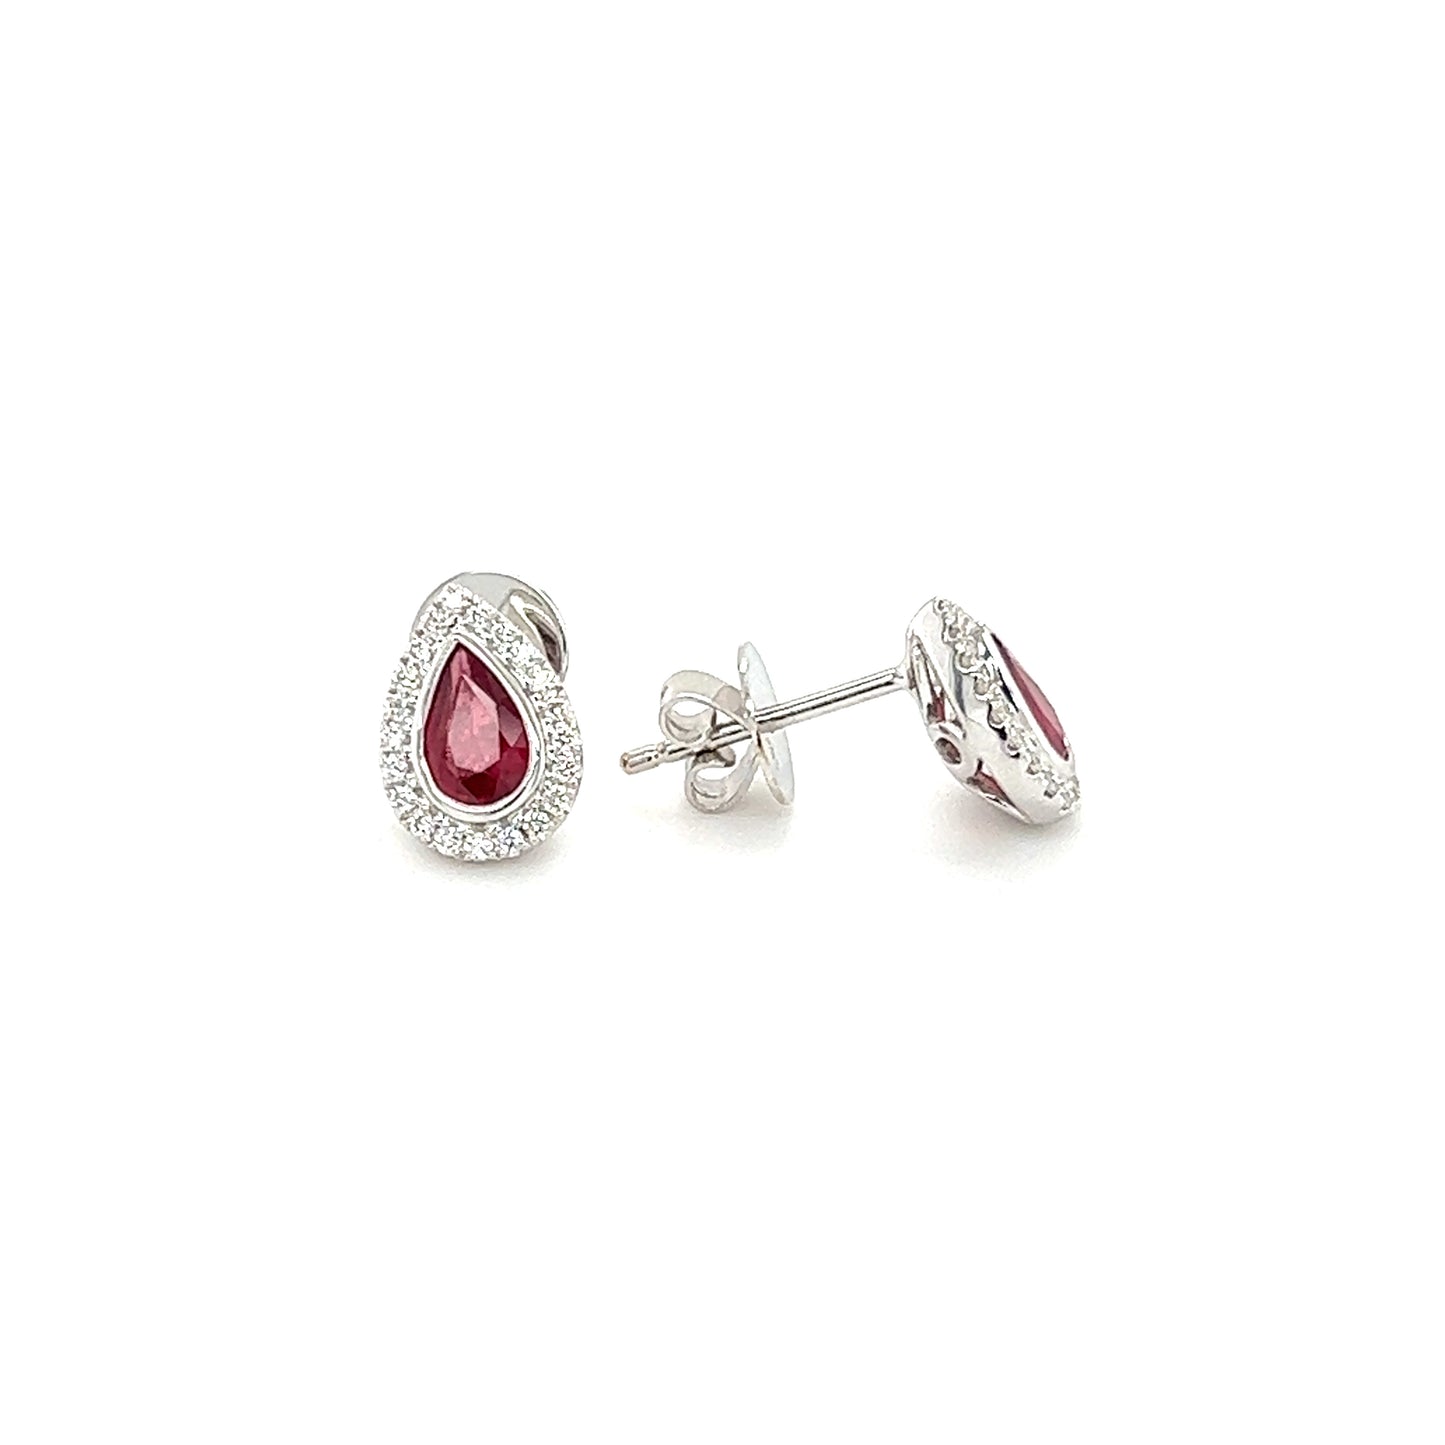 Pear Ruby Stud Earrings with Diamond Halo in 18K White Gold